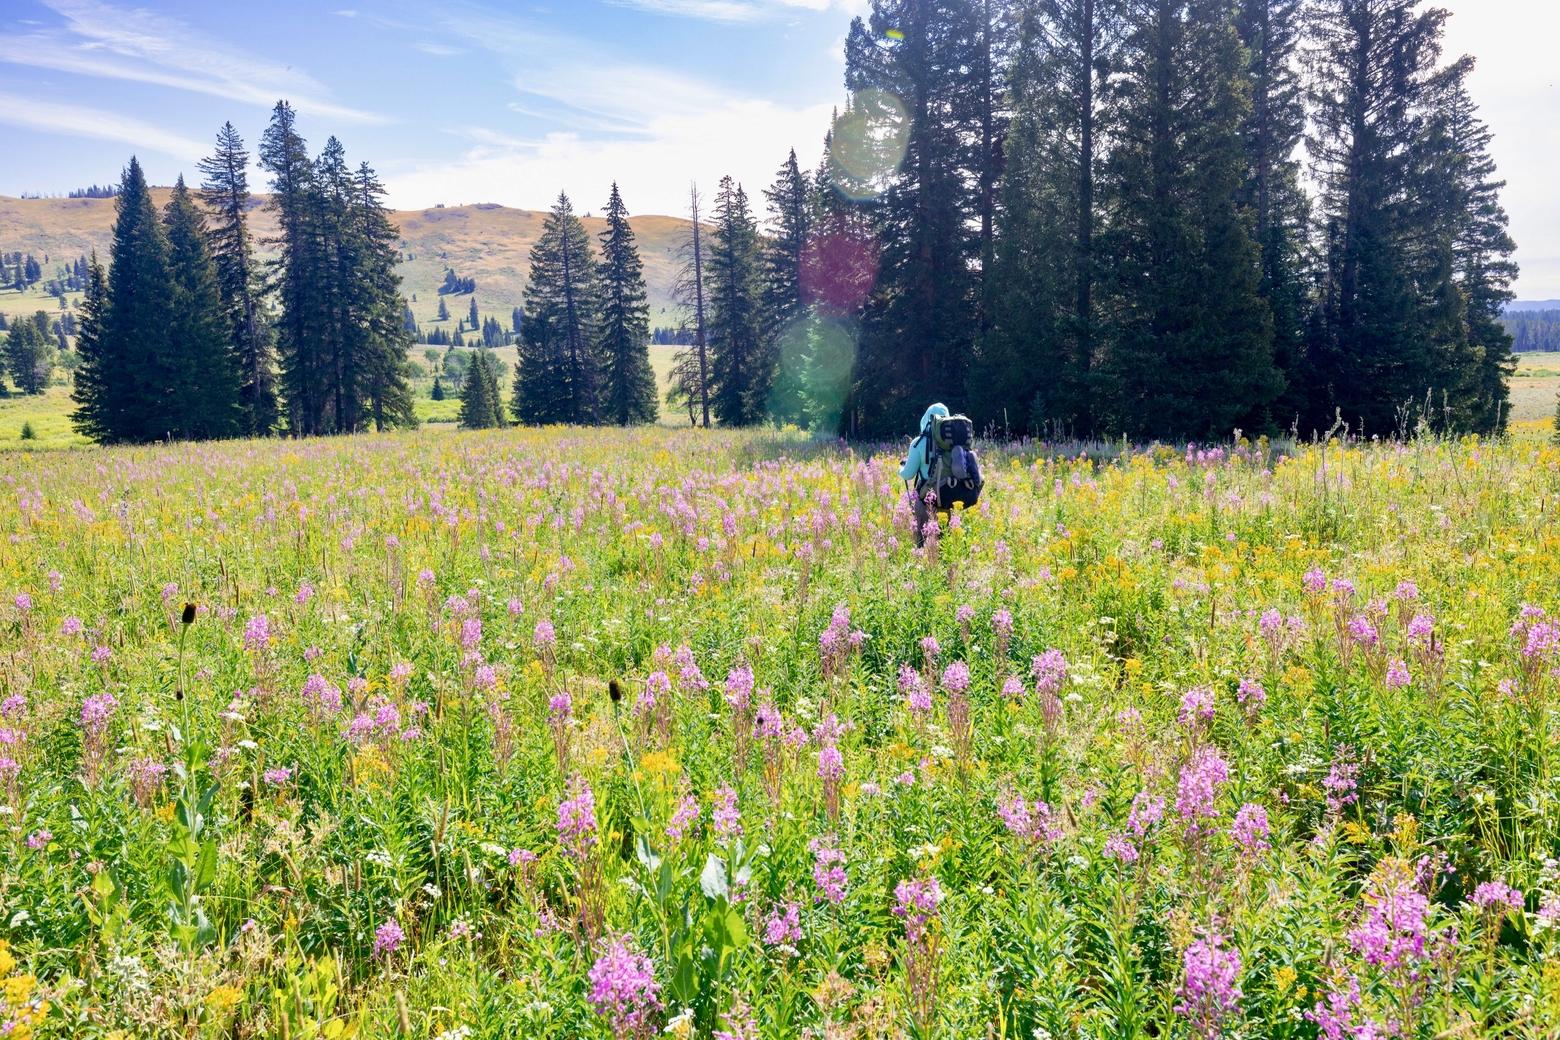 A hiker moves through a meadow of wildflowers in Yellowstone. There's an expression that amid our busy or lonely lives it helps to slow down, stand still and smell the roses. Taking a whiff and feeling the earth under our feet is good for us. Tate says one profound gift is to help others experience it, too. Photo courtesy Jacob W. Frank/NPS